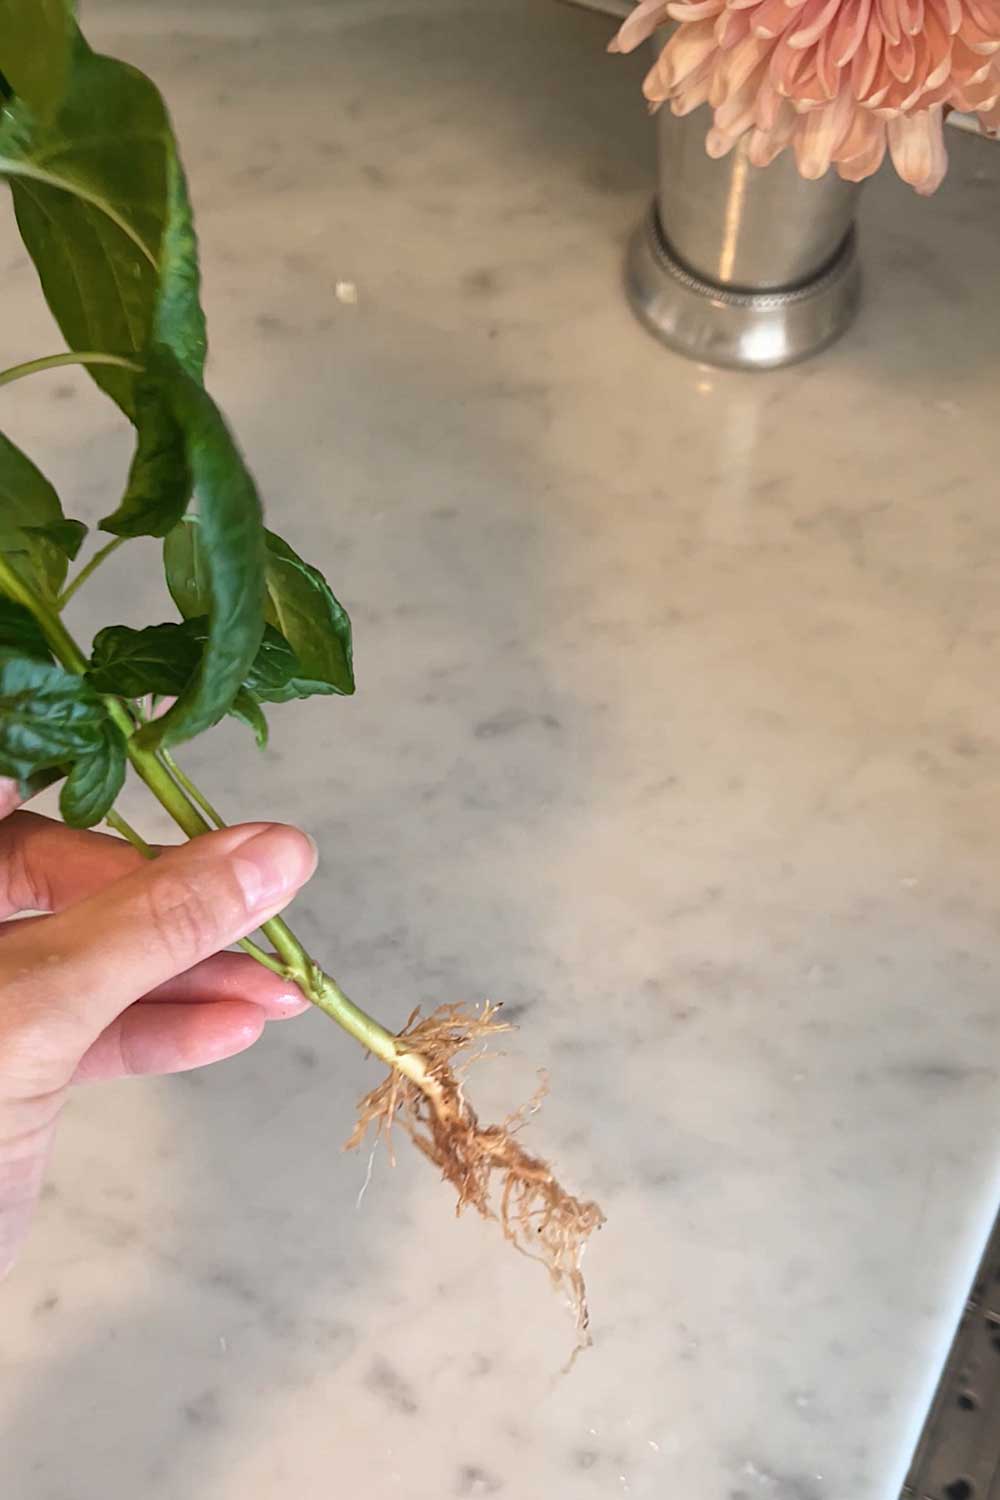 removed click & grow smart soil to expose white hydroponic roots